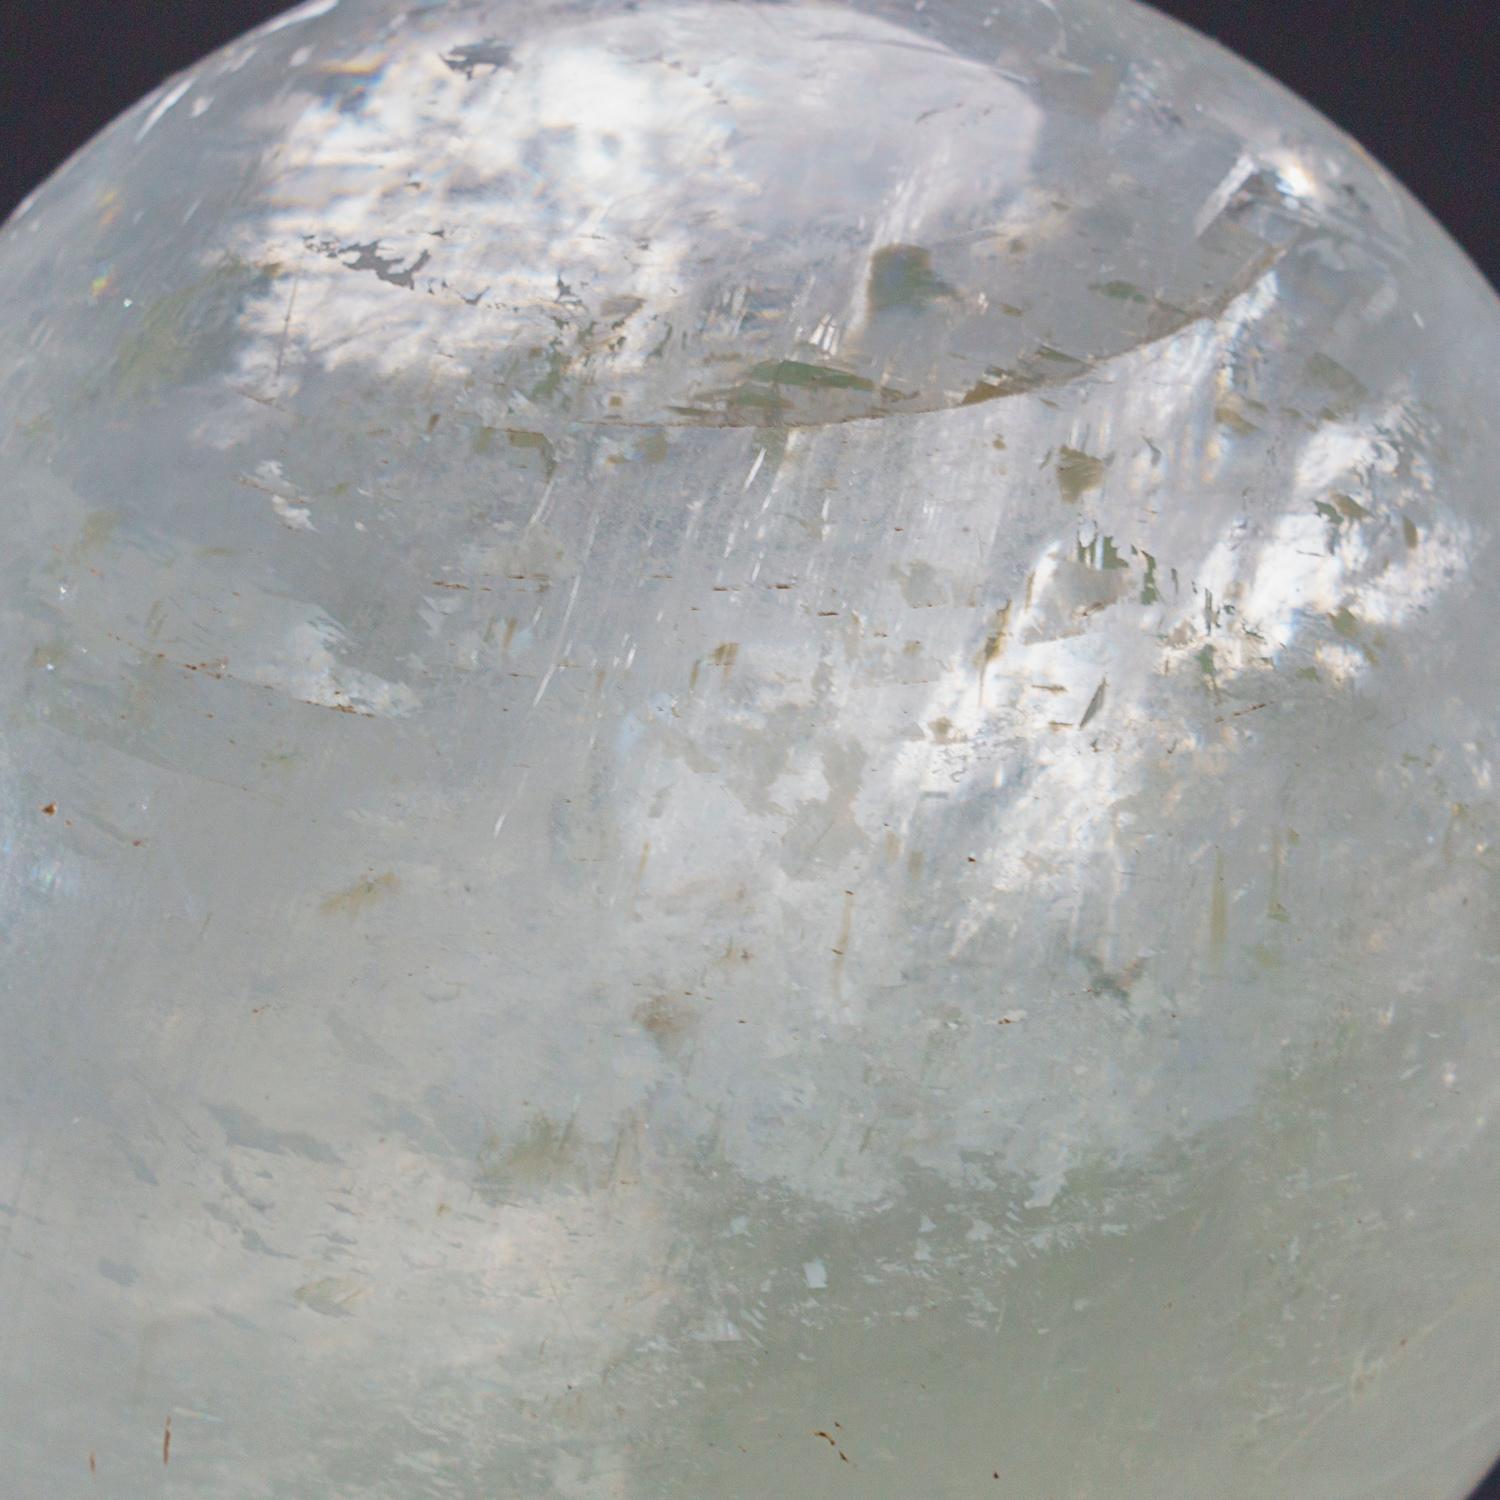 A beautiful Brazilian optical calcite sphere. This specimen has great transparency and is hand-polished to a beautiful smooth and highly reflective finish. 

Optical Calcite is a calcium carbonate mineral, being a colourless and transparent form of